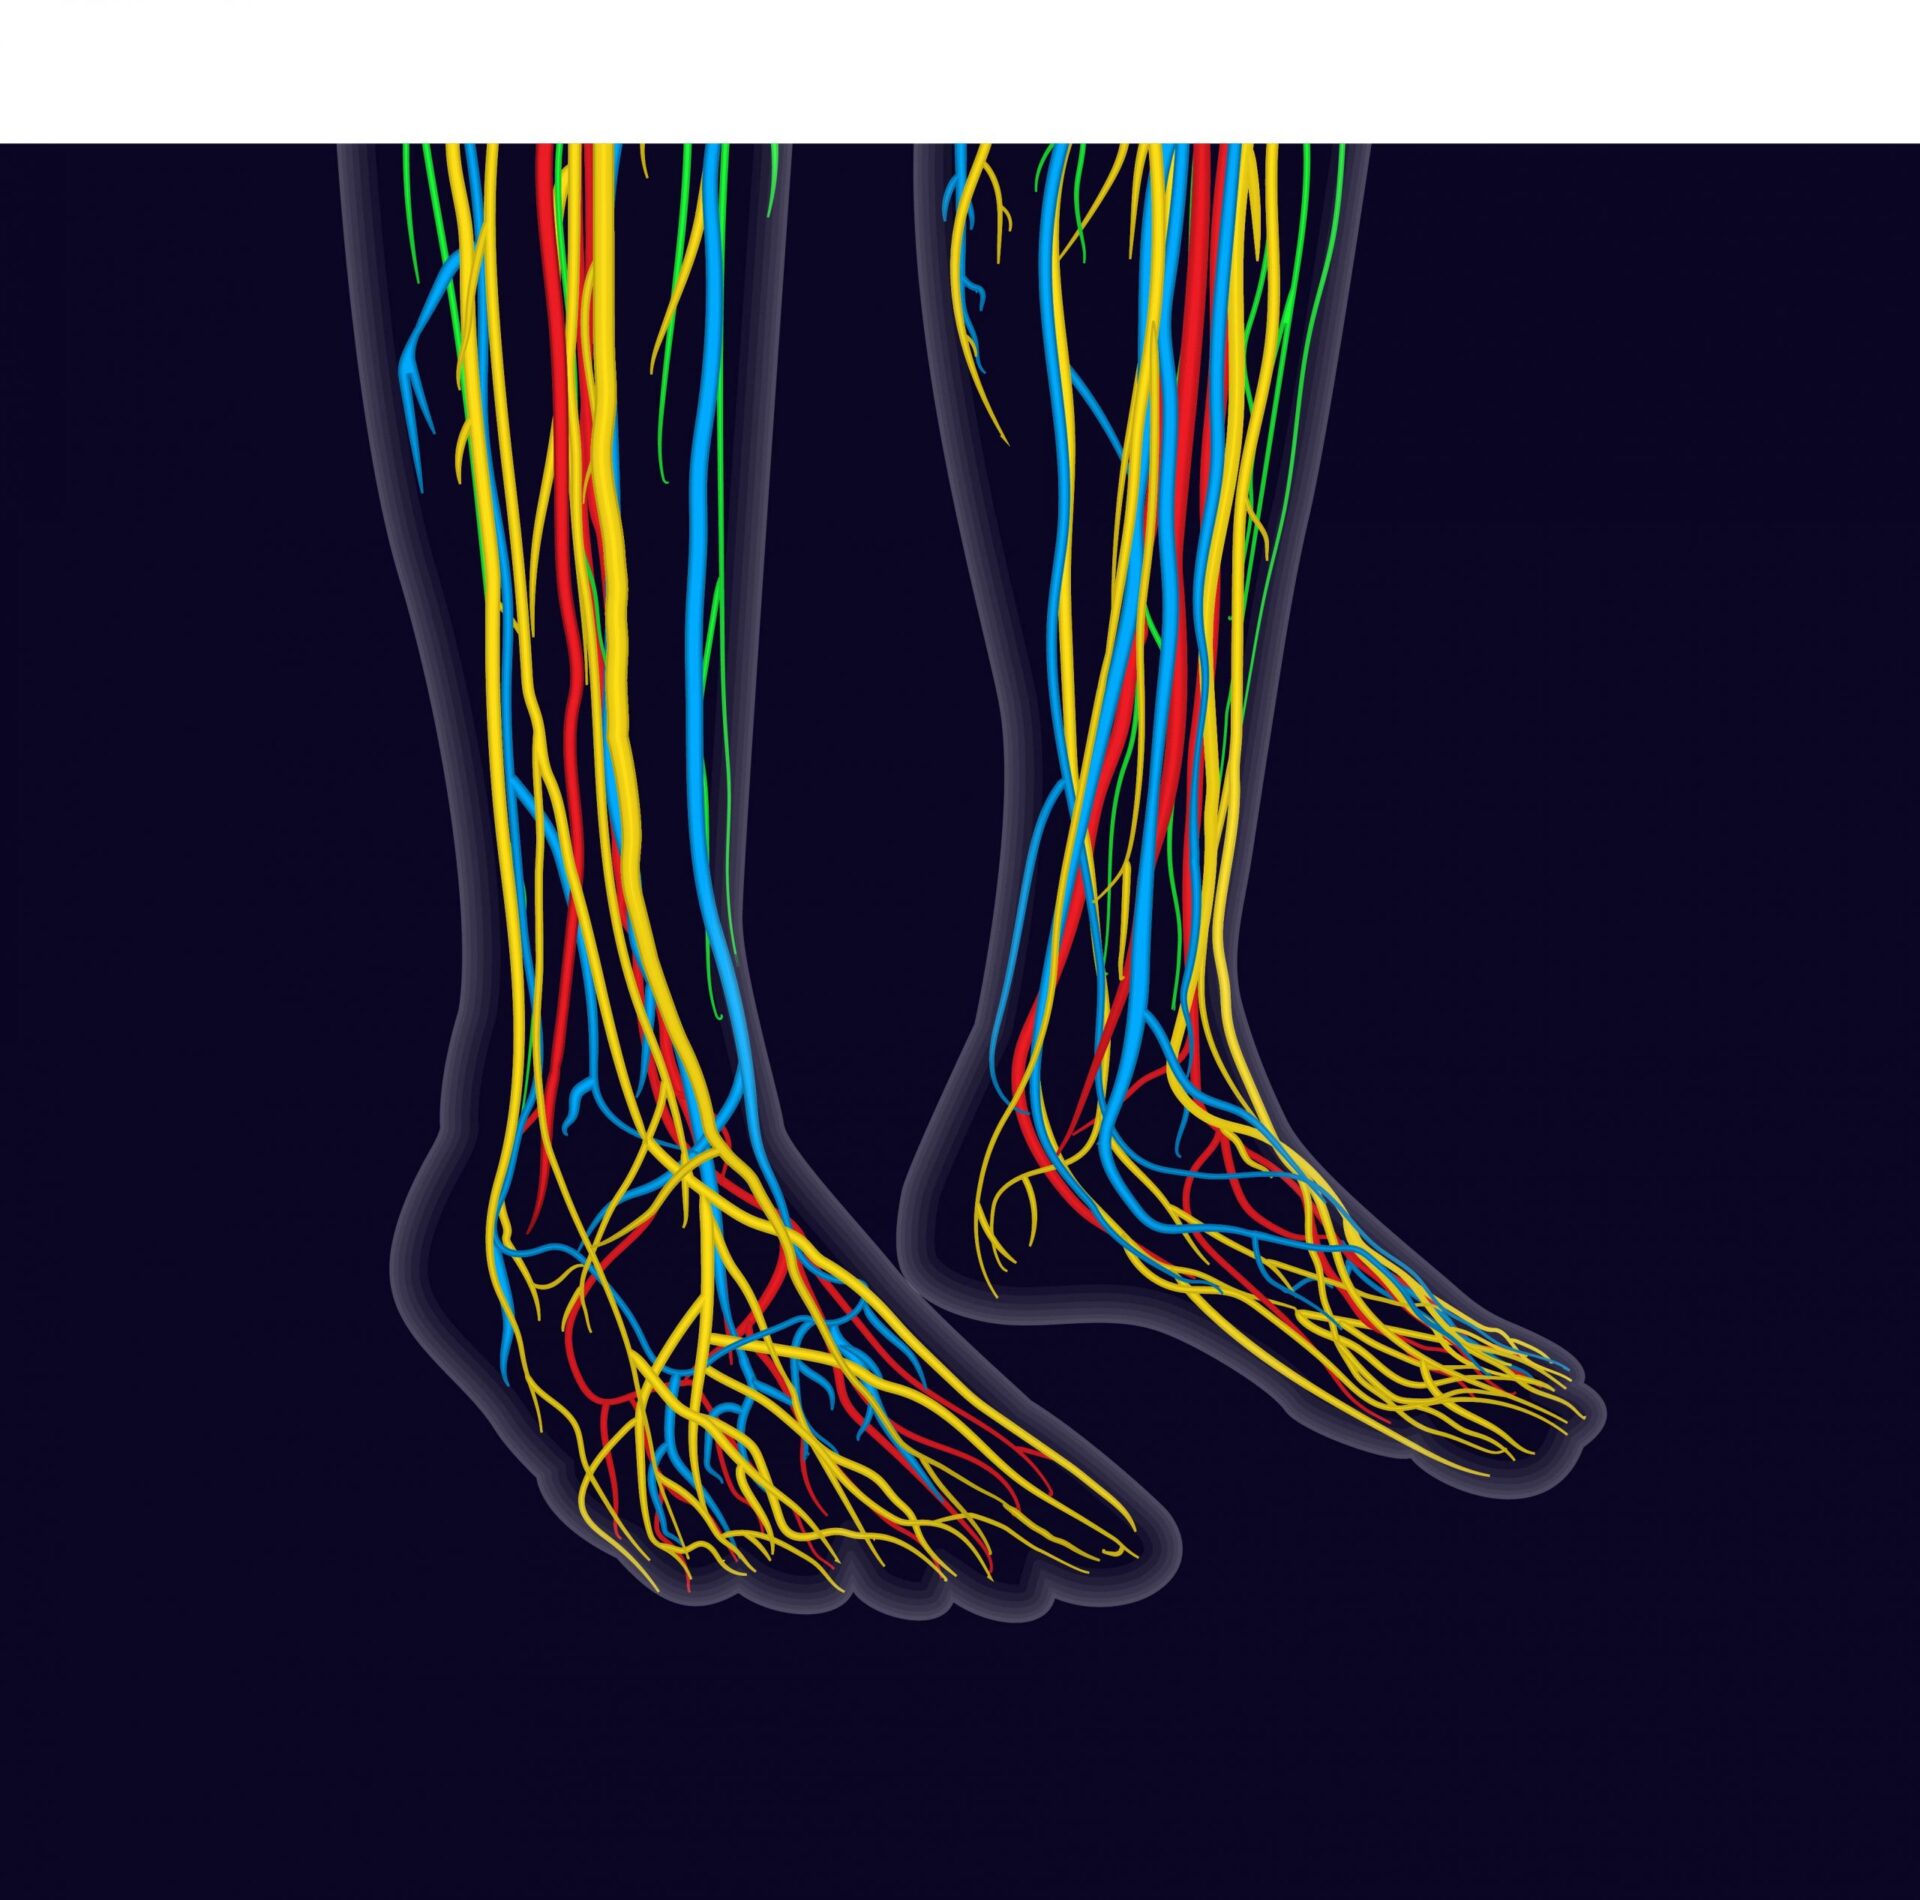 the foot and ankle are highlighted in this medical illustration